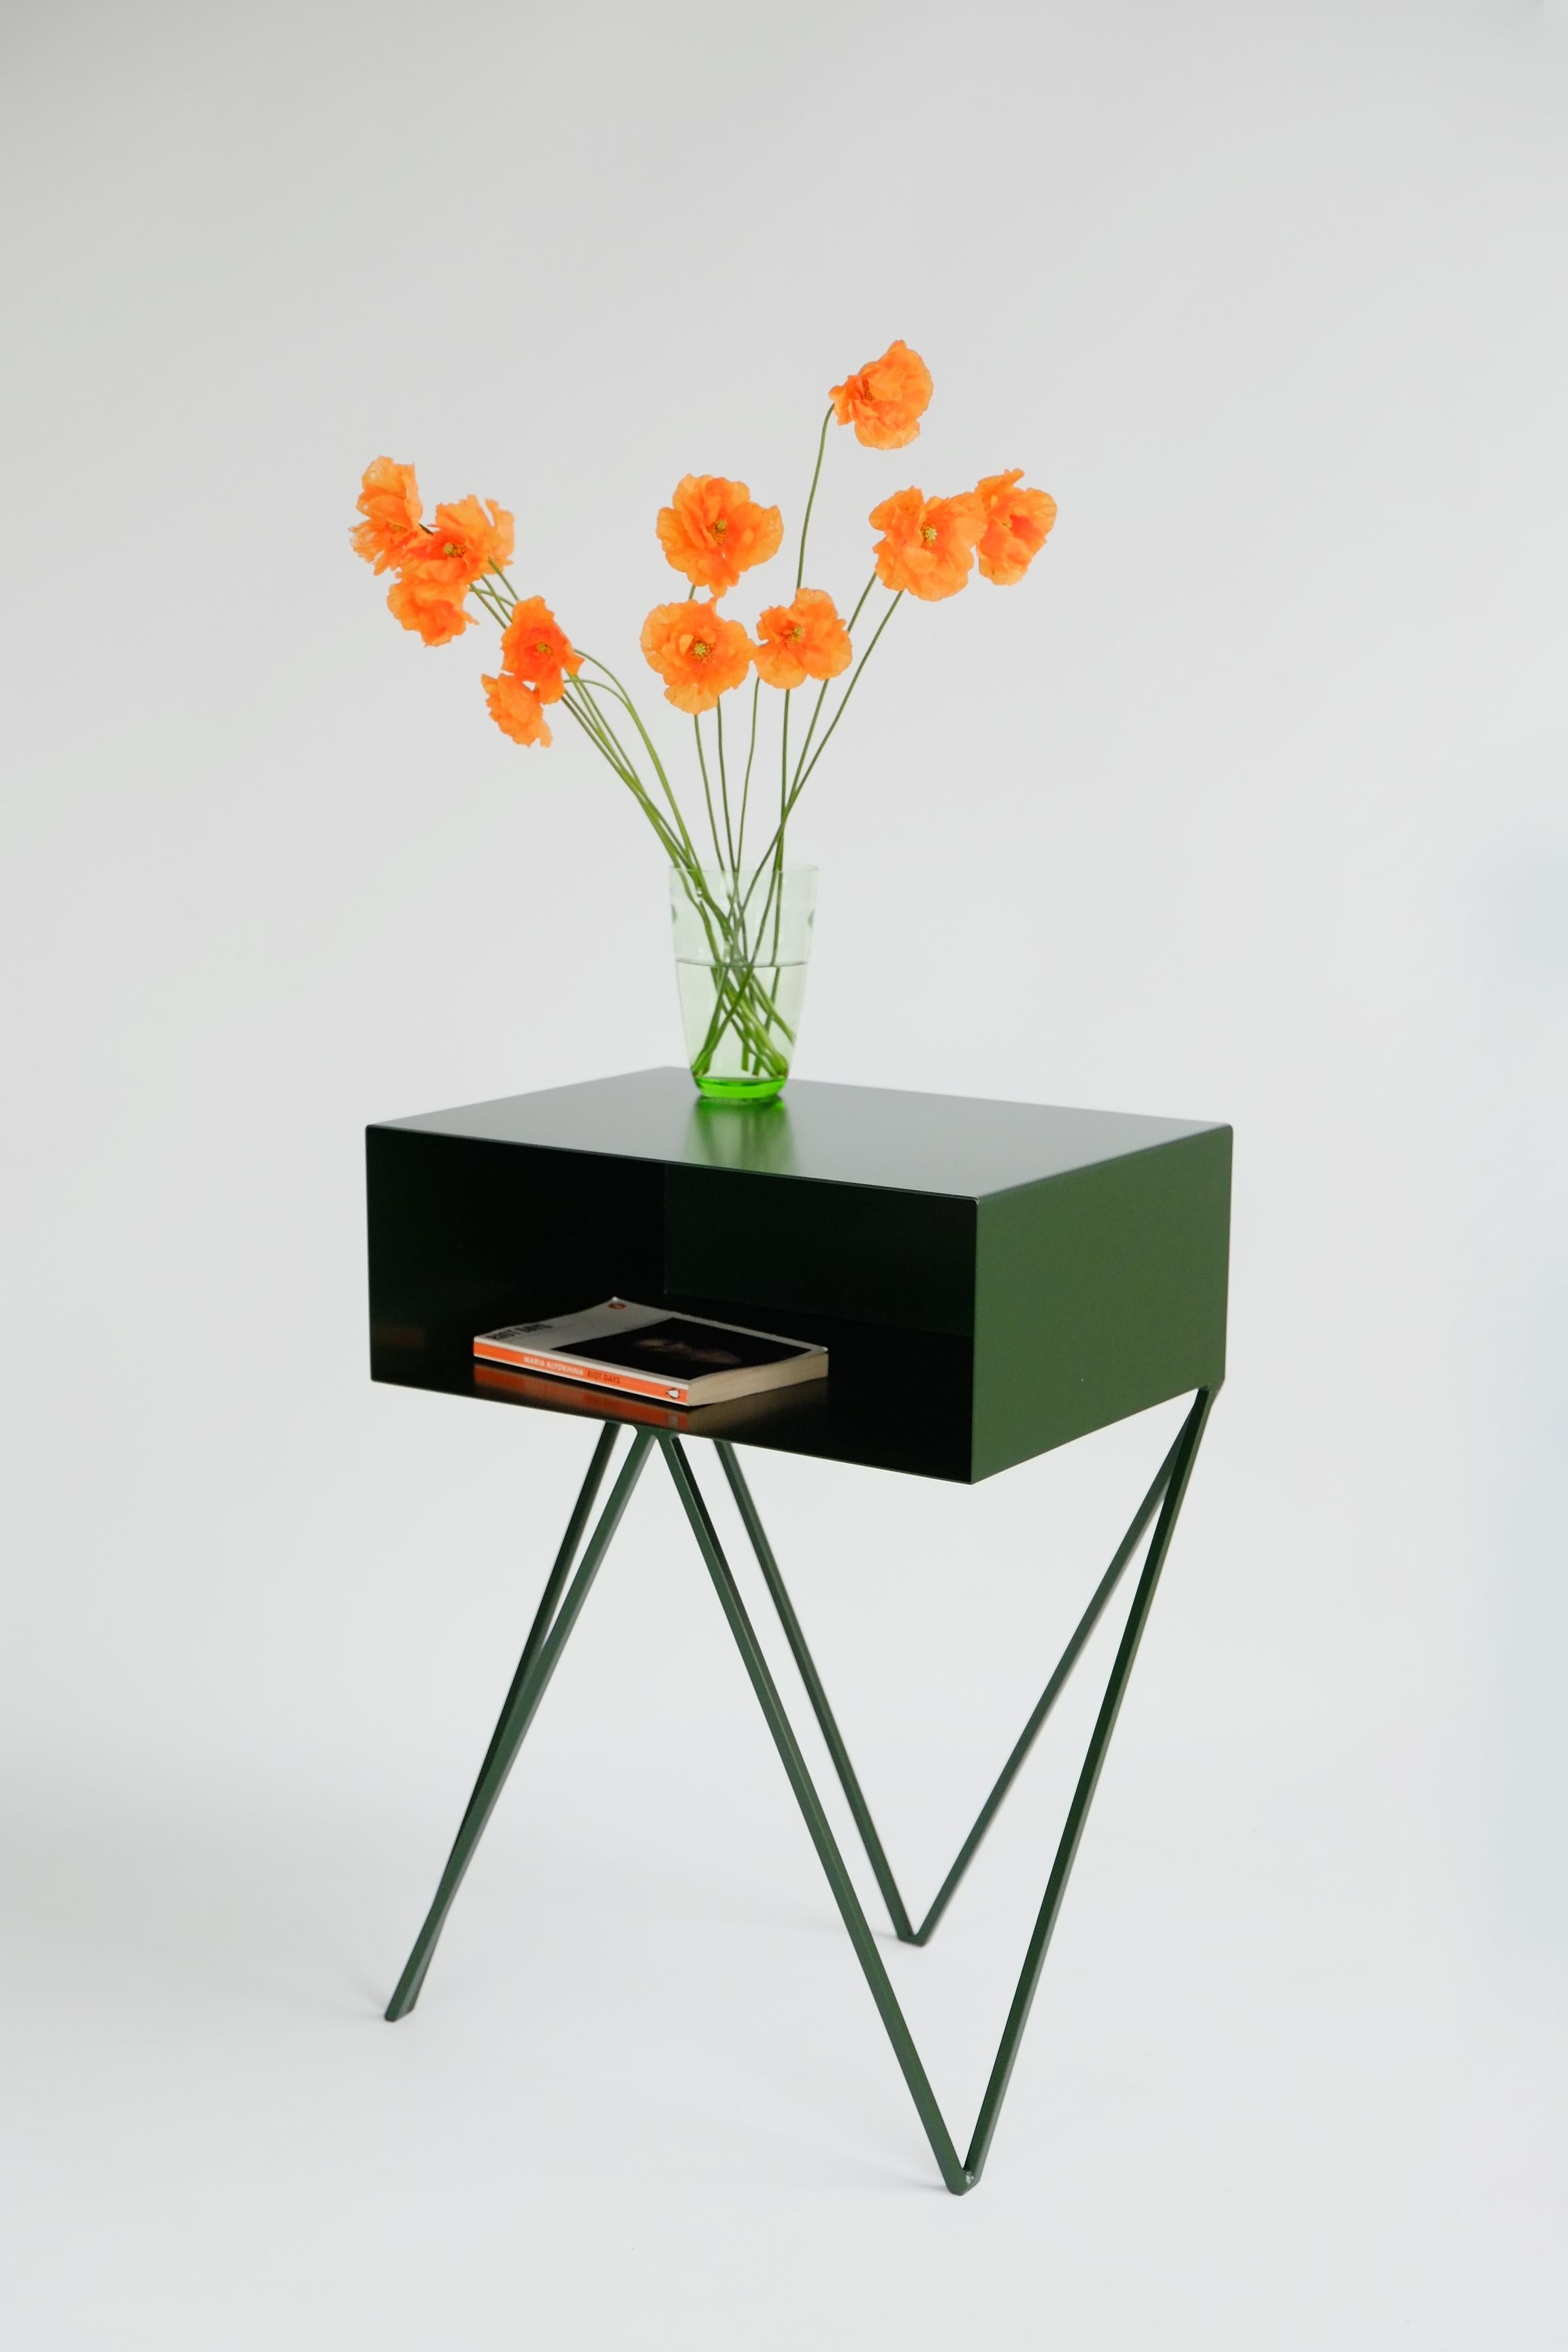 A pair of deep green Robot bedside tables. The side table features an open shelf on zig zag legs. A fun and functional design made of solid steel, powder-coated in deep green. The clean lines look great against period details as well as in modern